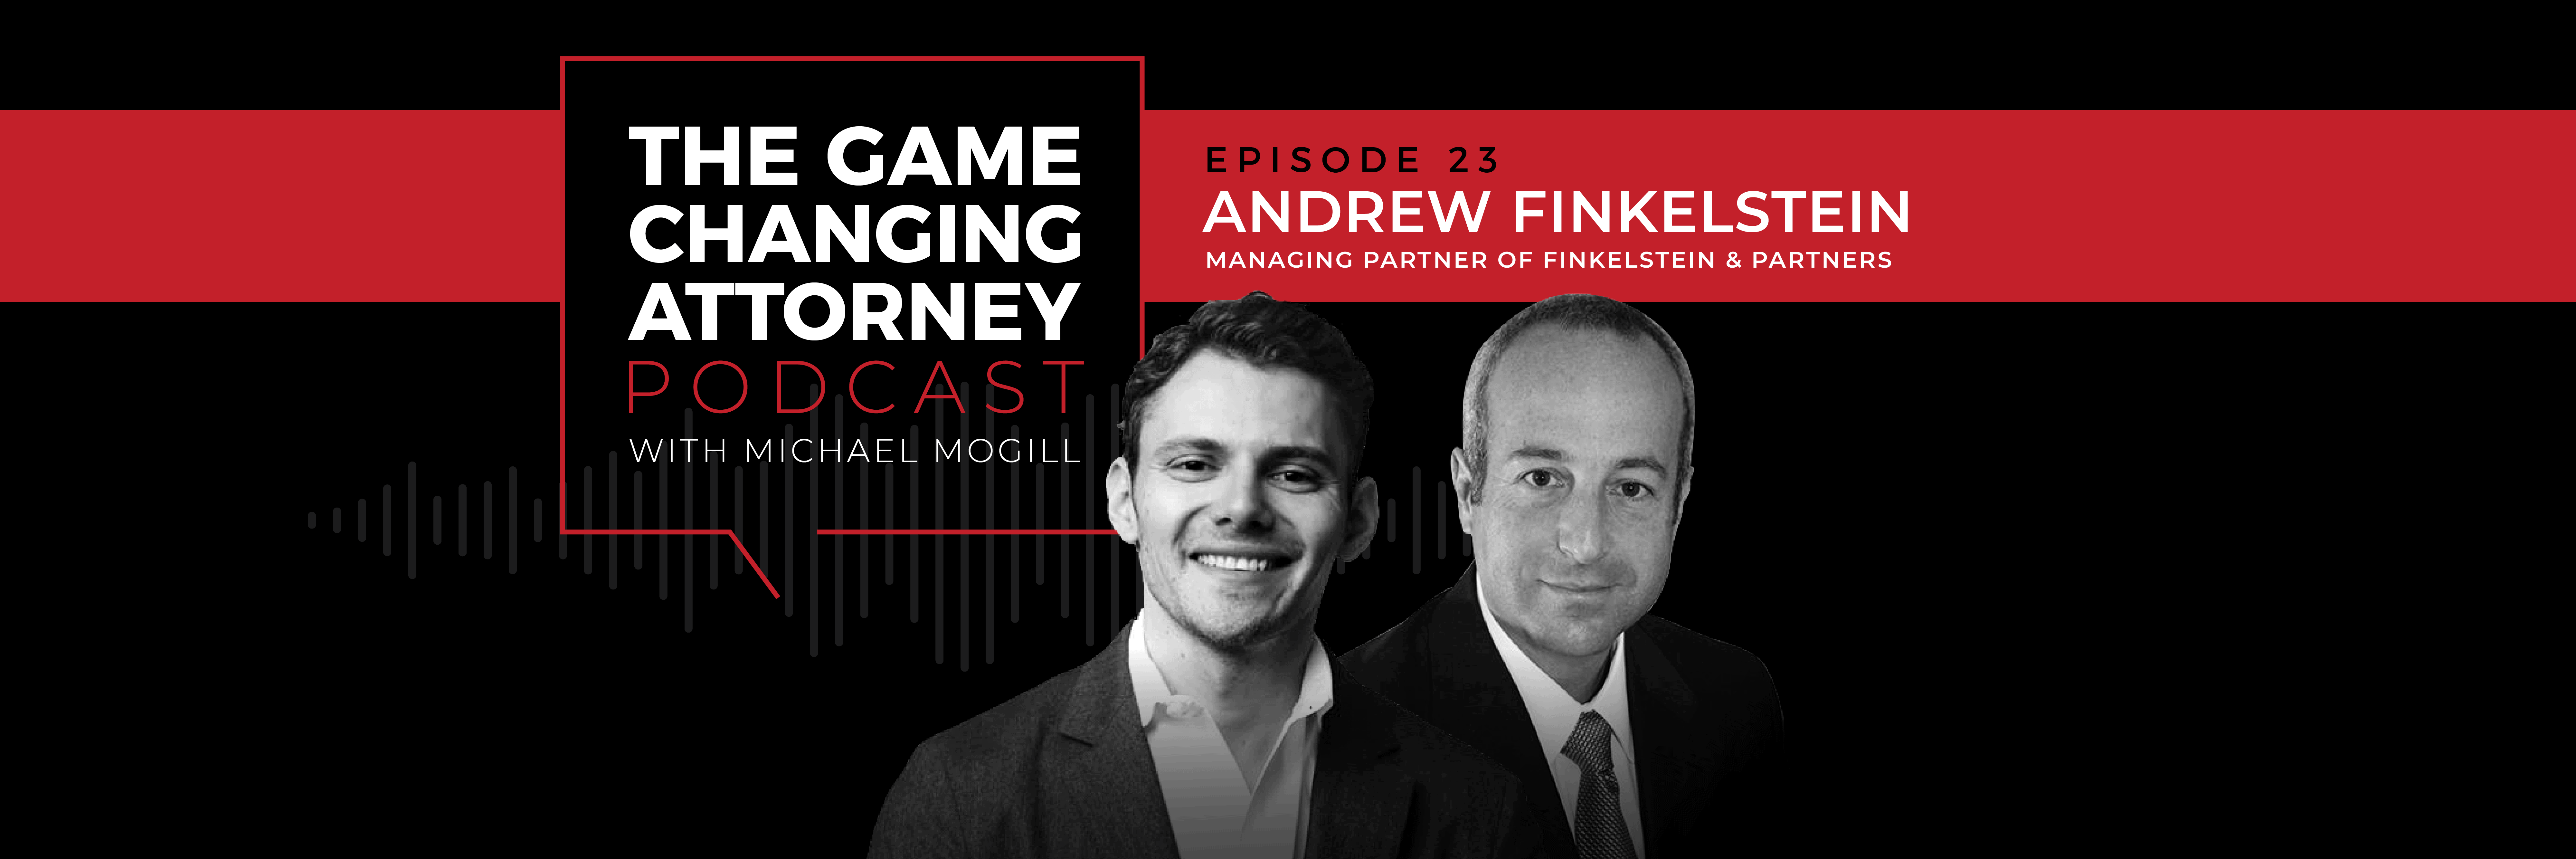 Andrew Finkelstein - The Game Changing Attorney Podcast - Desktop